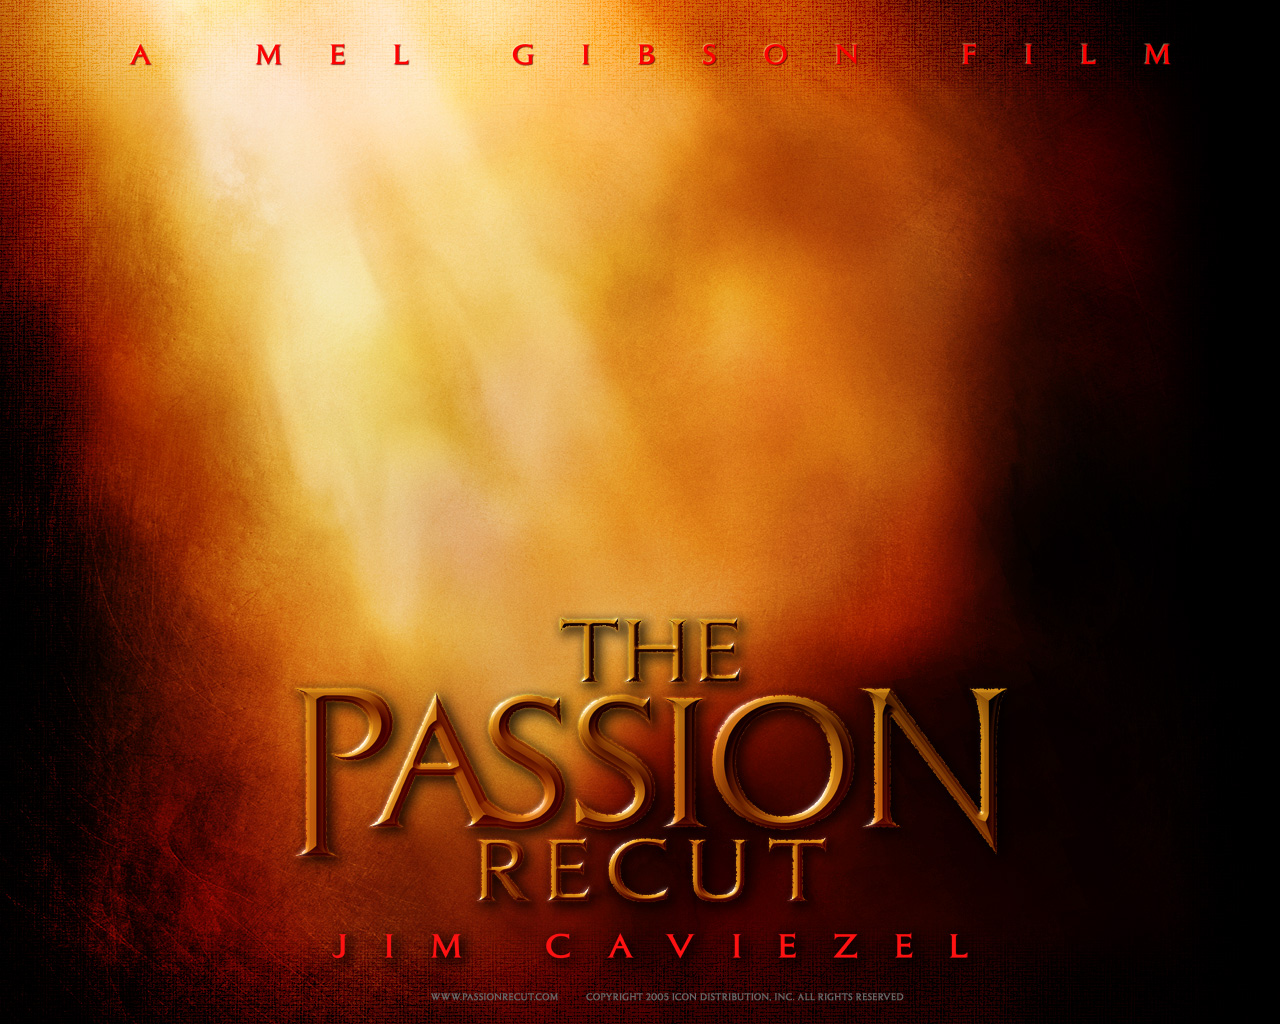 watch passion of the christ online for free